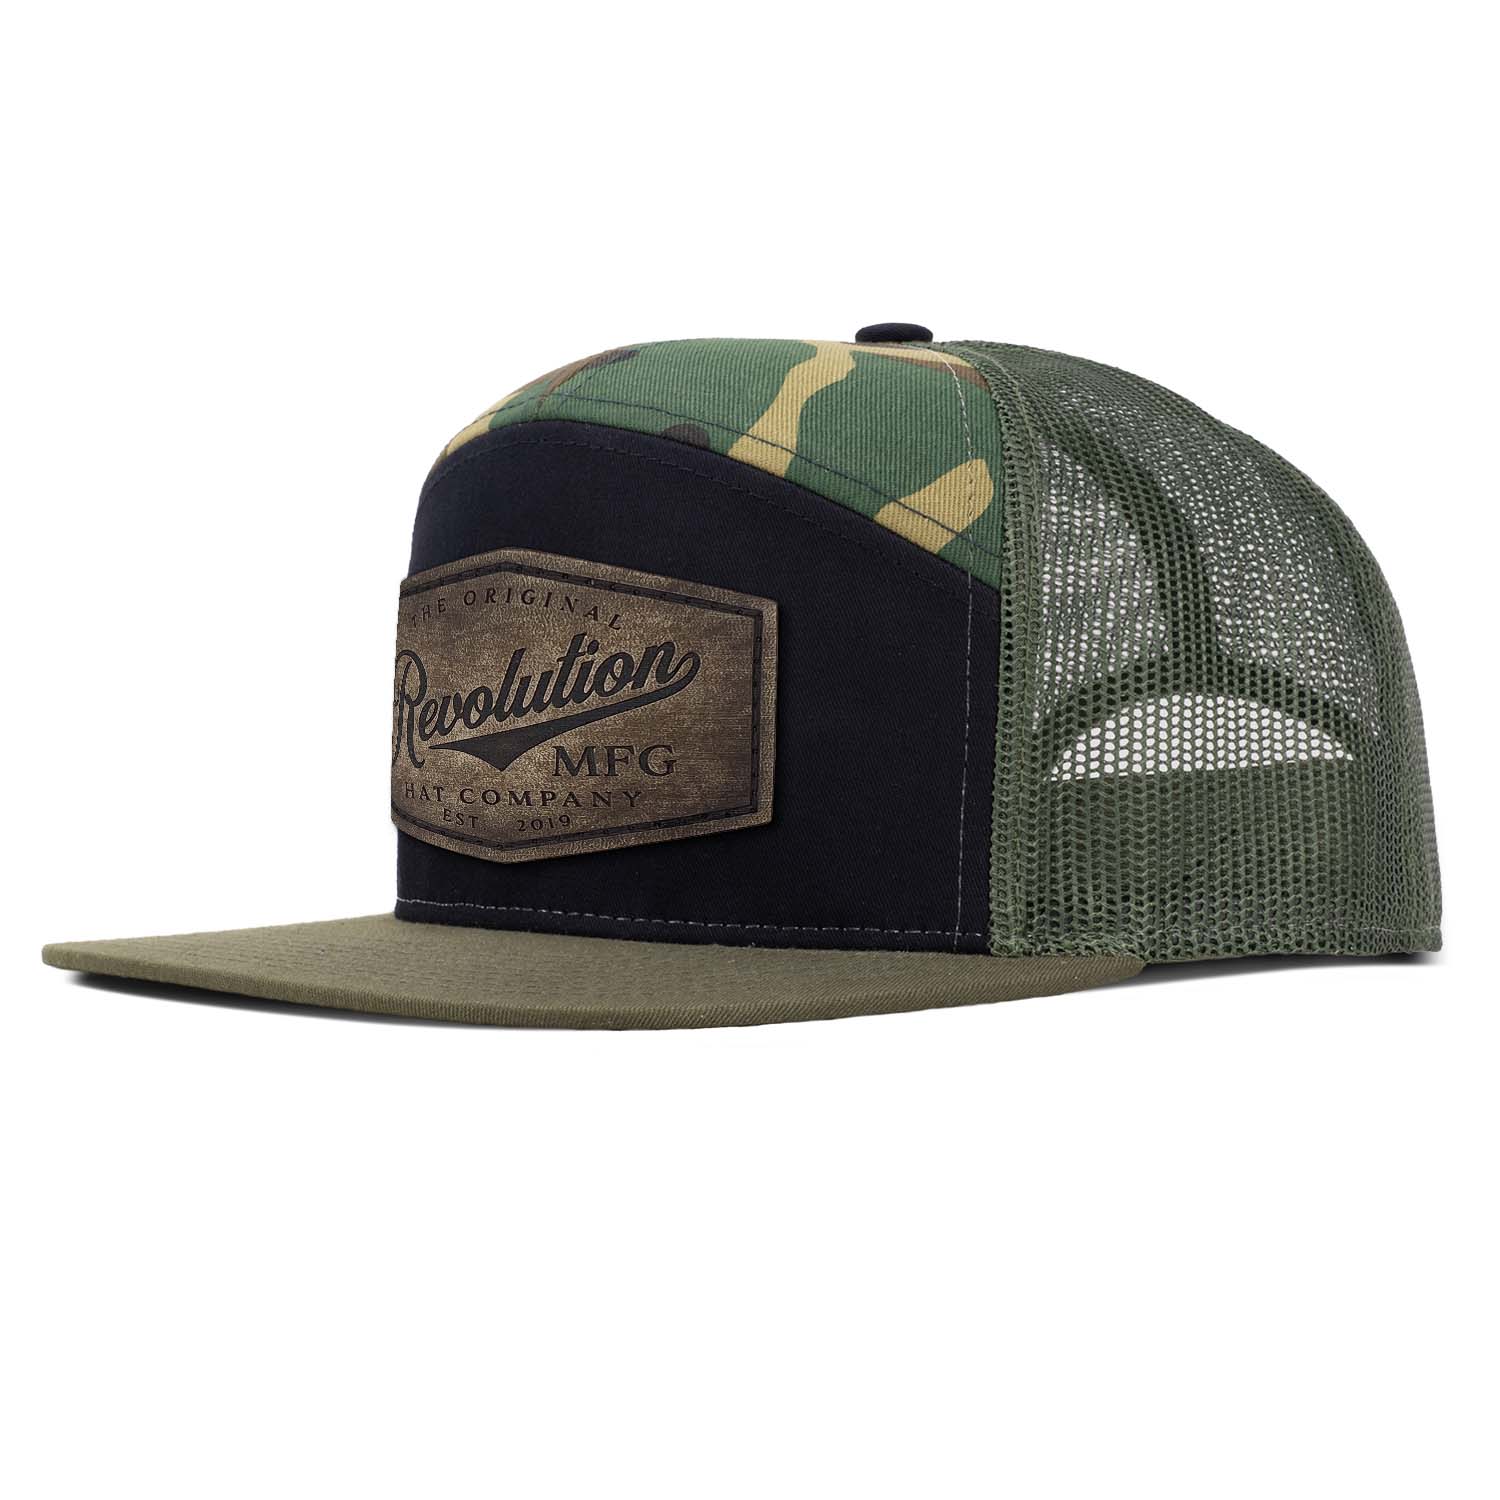 Revolution Hat Co Vintage full grain leather patch stitched on a black, woodland, and loden 7 panel flat bill trucker hat